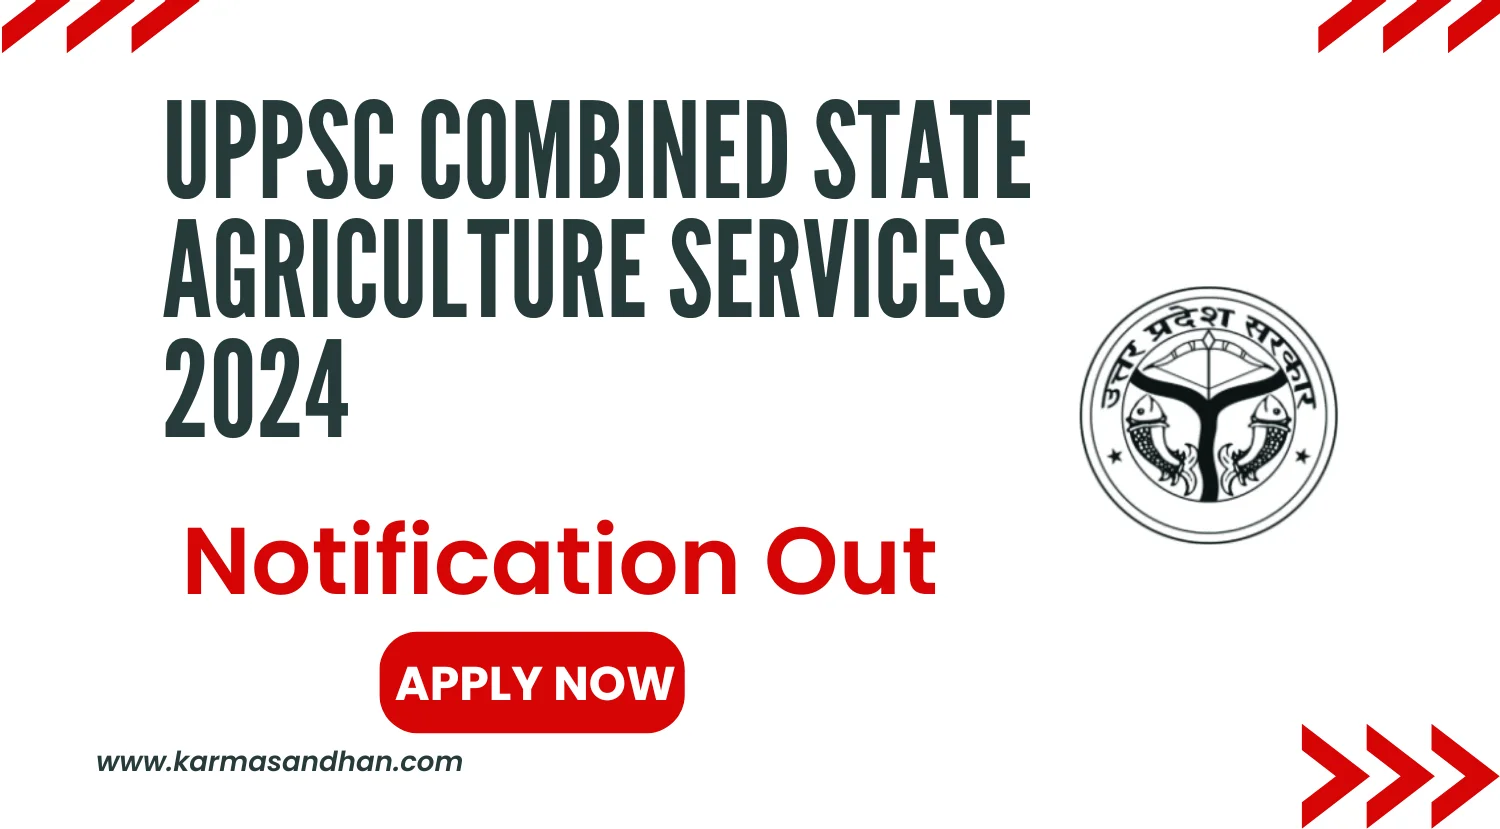 UPPSC Combined State Agriculture Services 2024